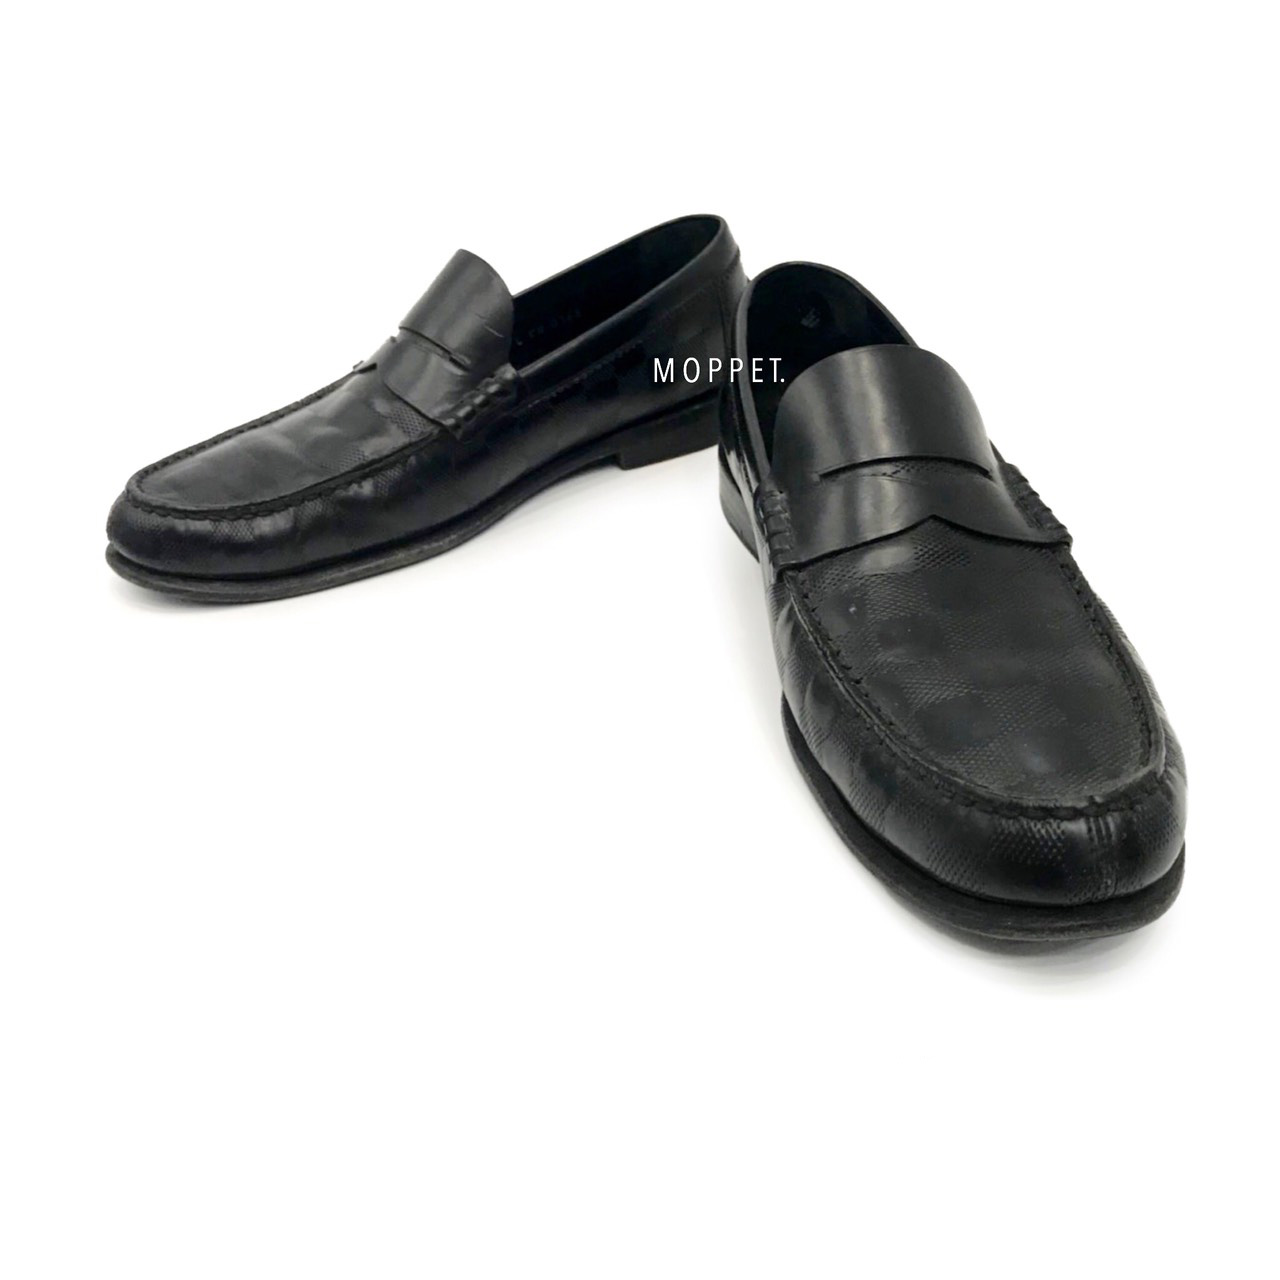 mens loafers size 6